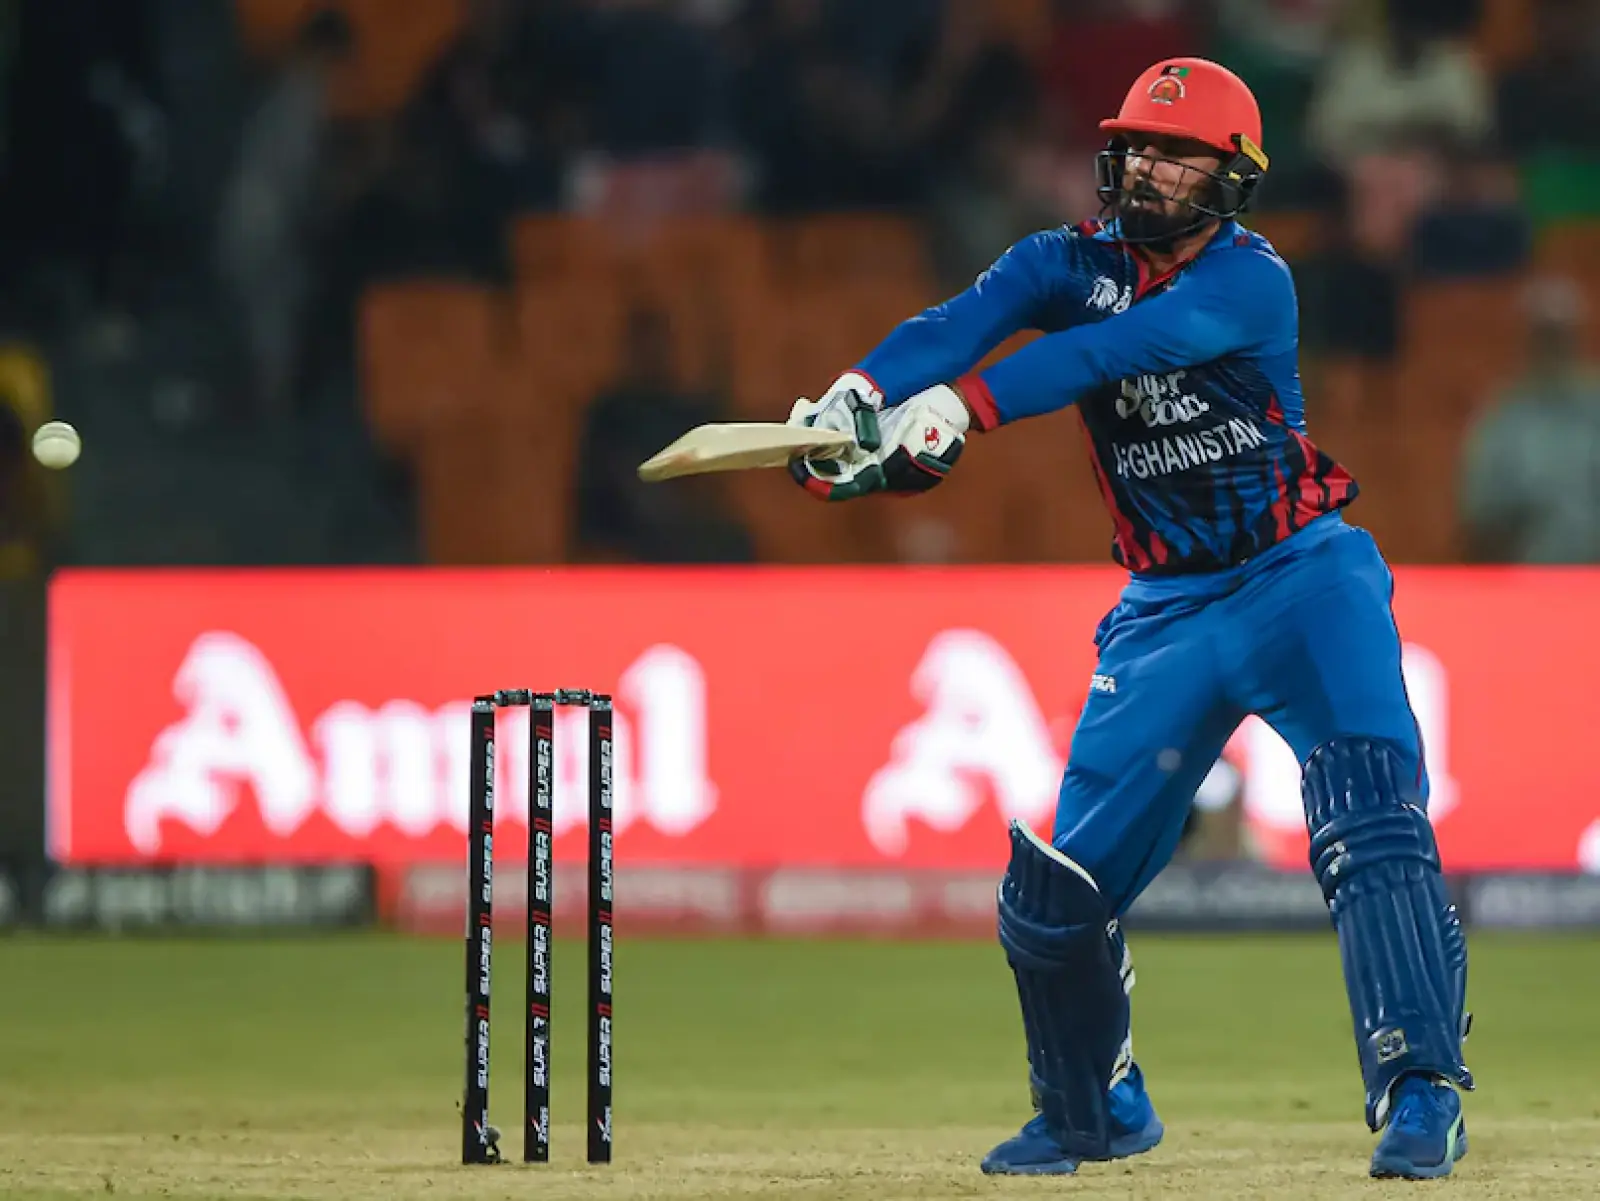 Afghanistan set India a target of 159 runs thanks to Mohammad Nabi's powerful batting; Akshar and Mukesh both claimed two wickets